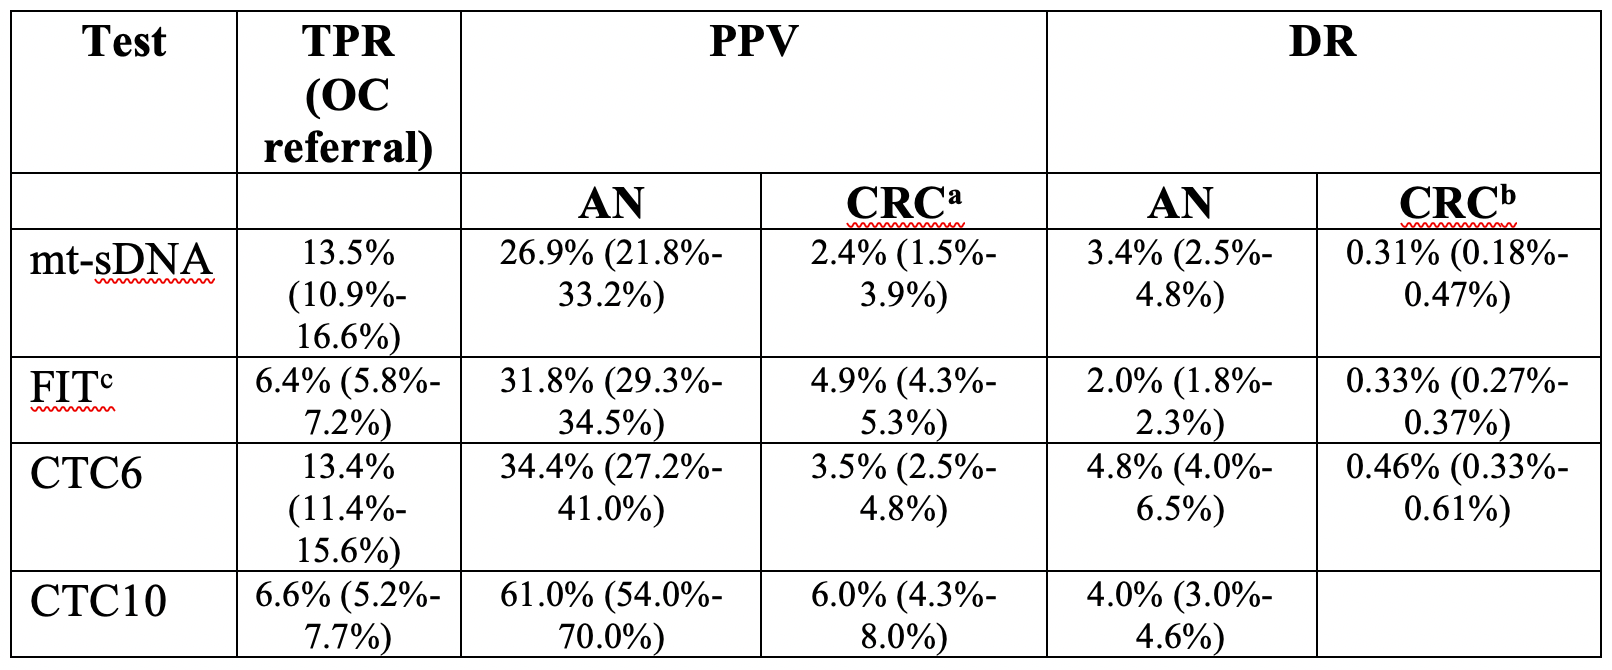 Values indicate point estimates (with 95% confidence interval). aCRC-PPV for CTC 30=54.7% (33.5%-83.2%). bCRC positivity thresholds (6mm and 10mm) were combined for analysis, since there were no differences in CRC-DR between these two. c Includes data for all FIT thresholds.